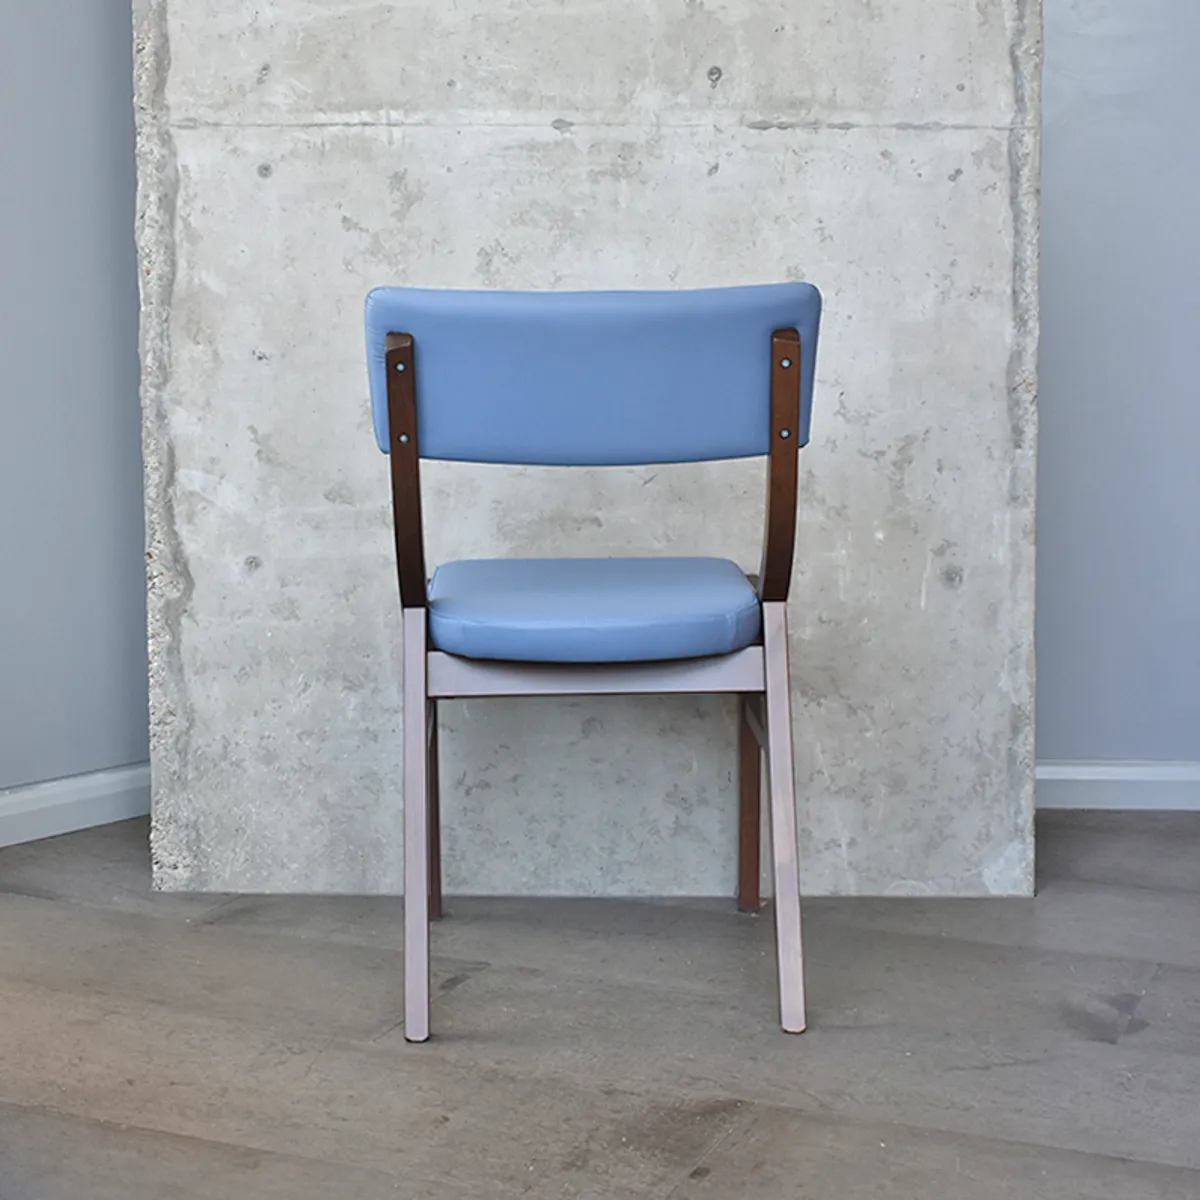 Victoria Chair New Furniture From Milan 2019 By Inside Out Contracts 020